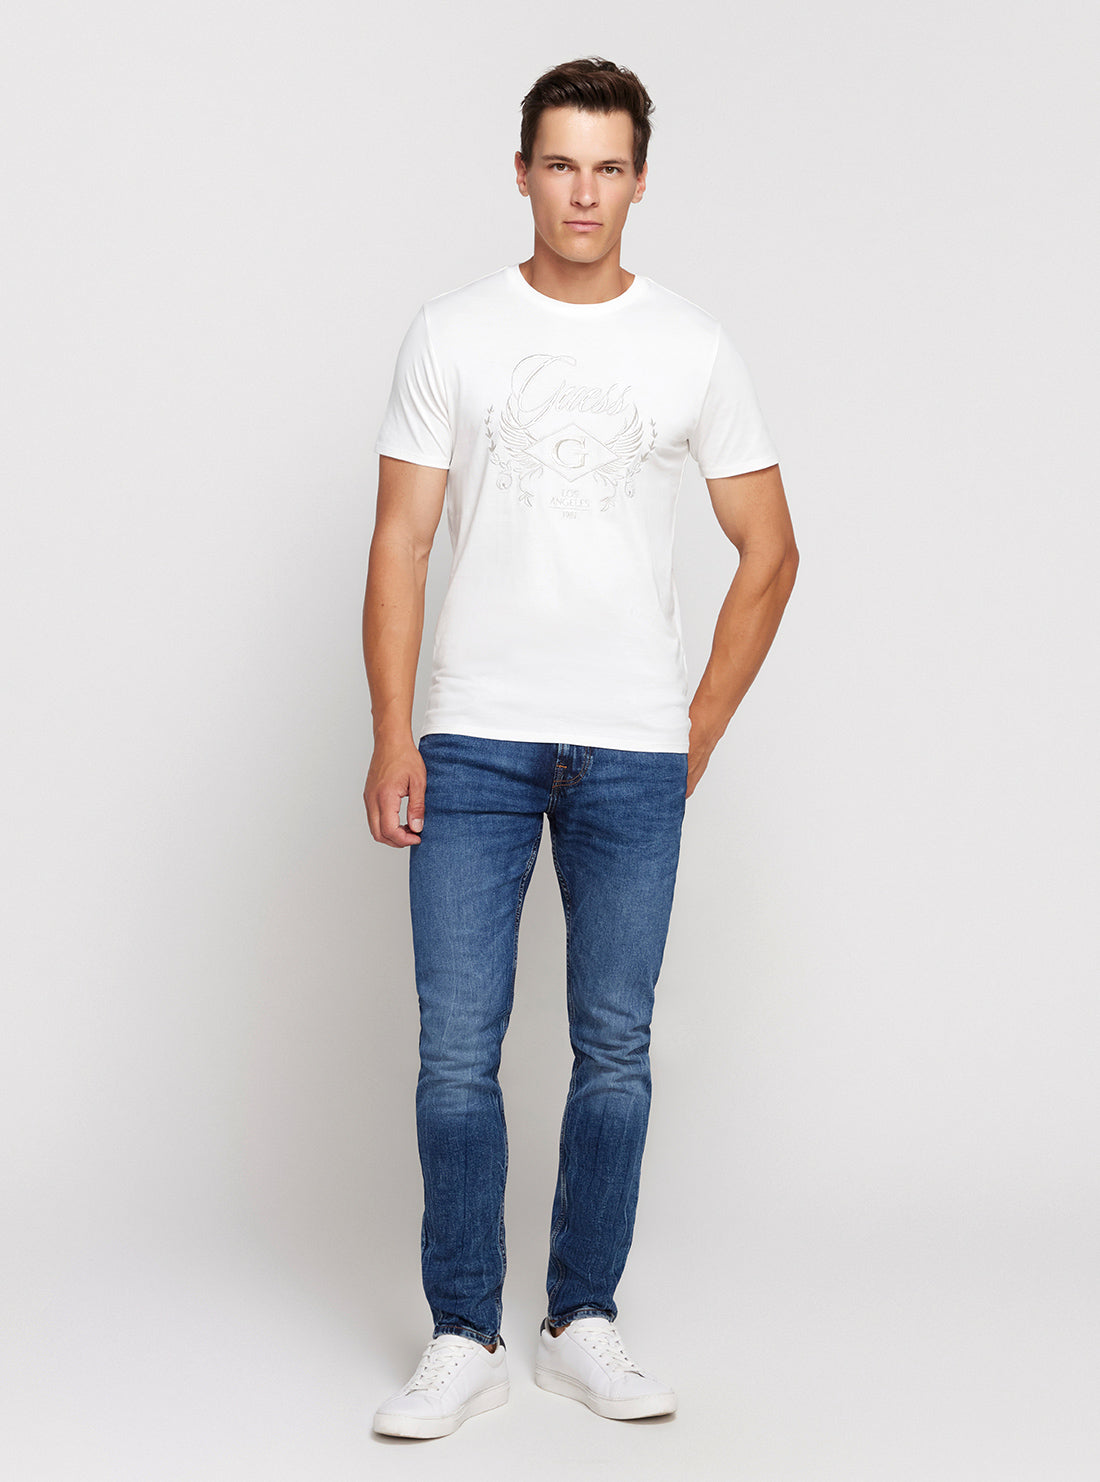 GUESS Eco White Wing Crest T-Shirt full view